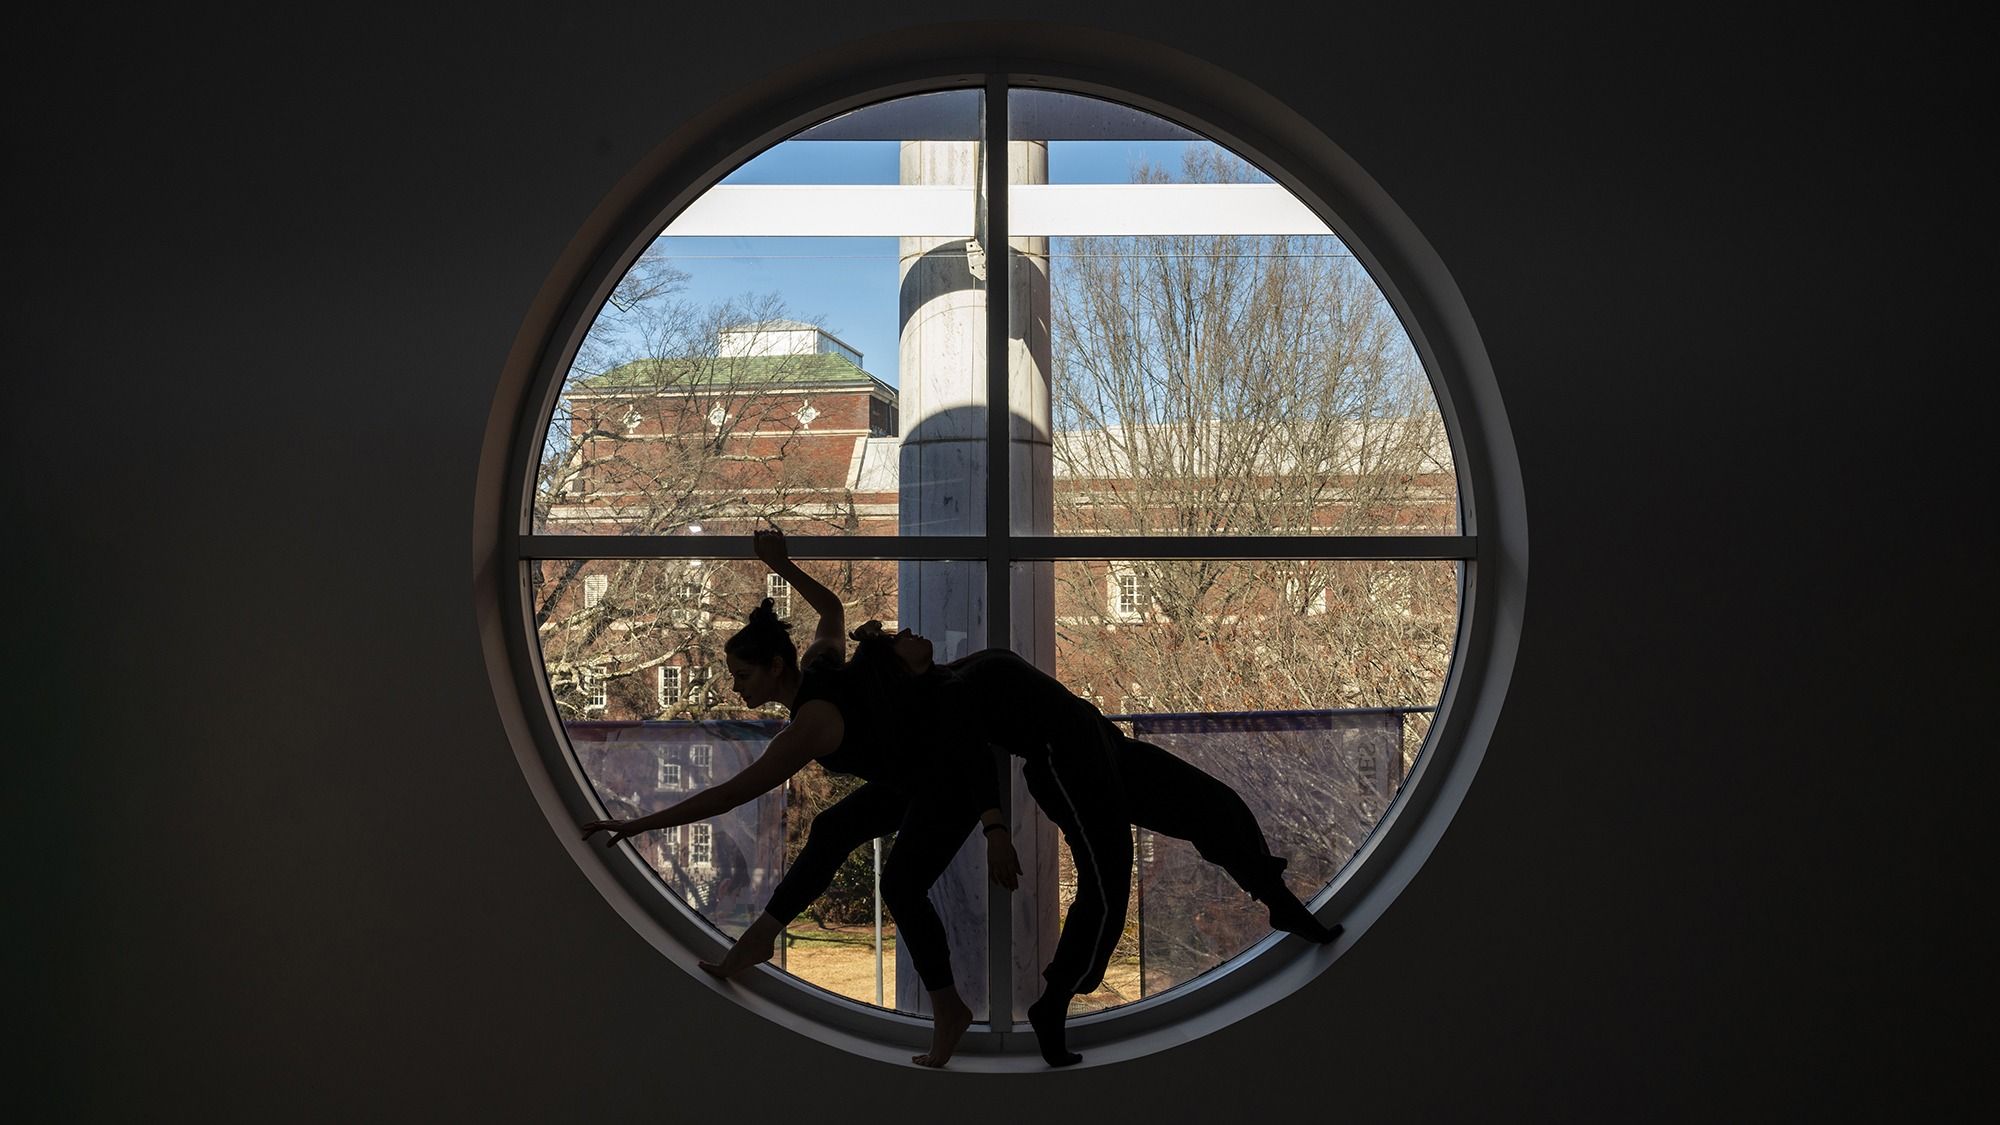 Two dancers silhouettes in front of a window